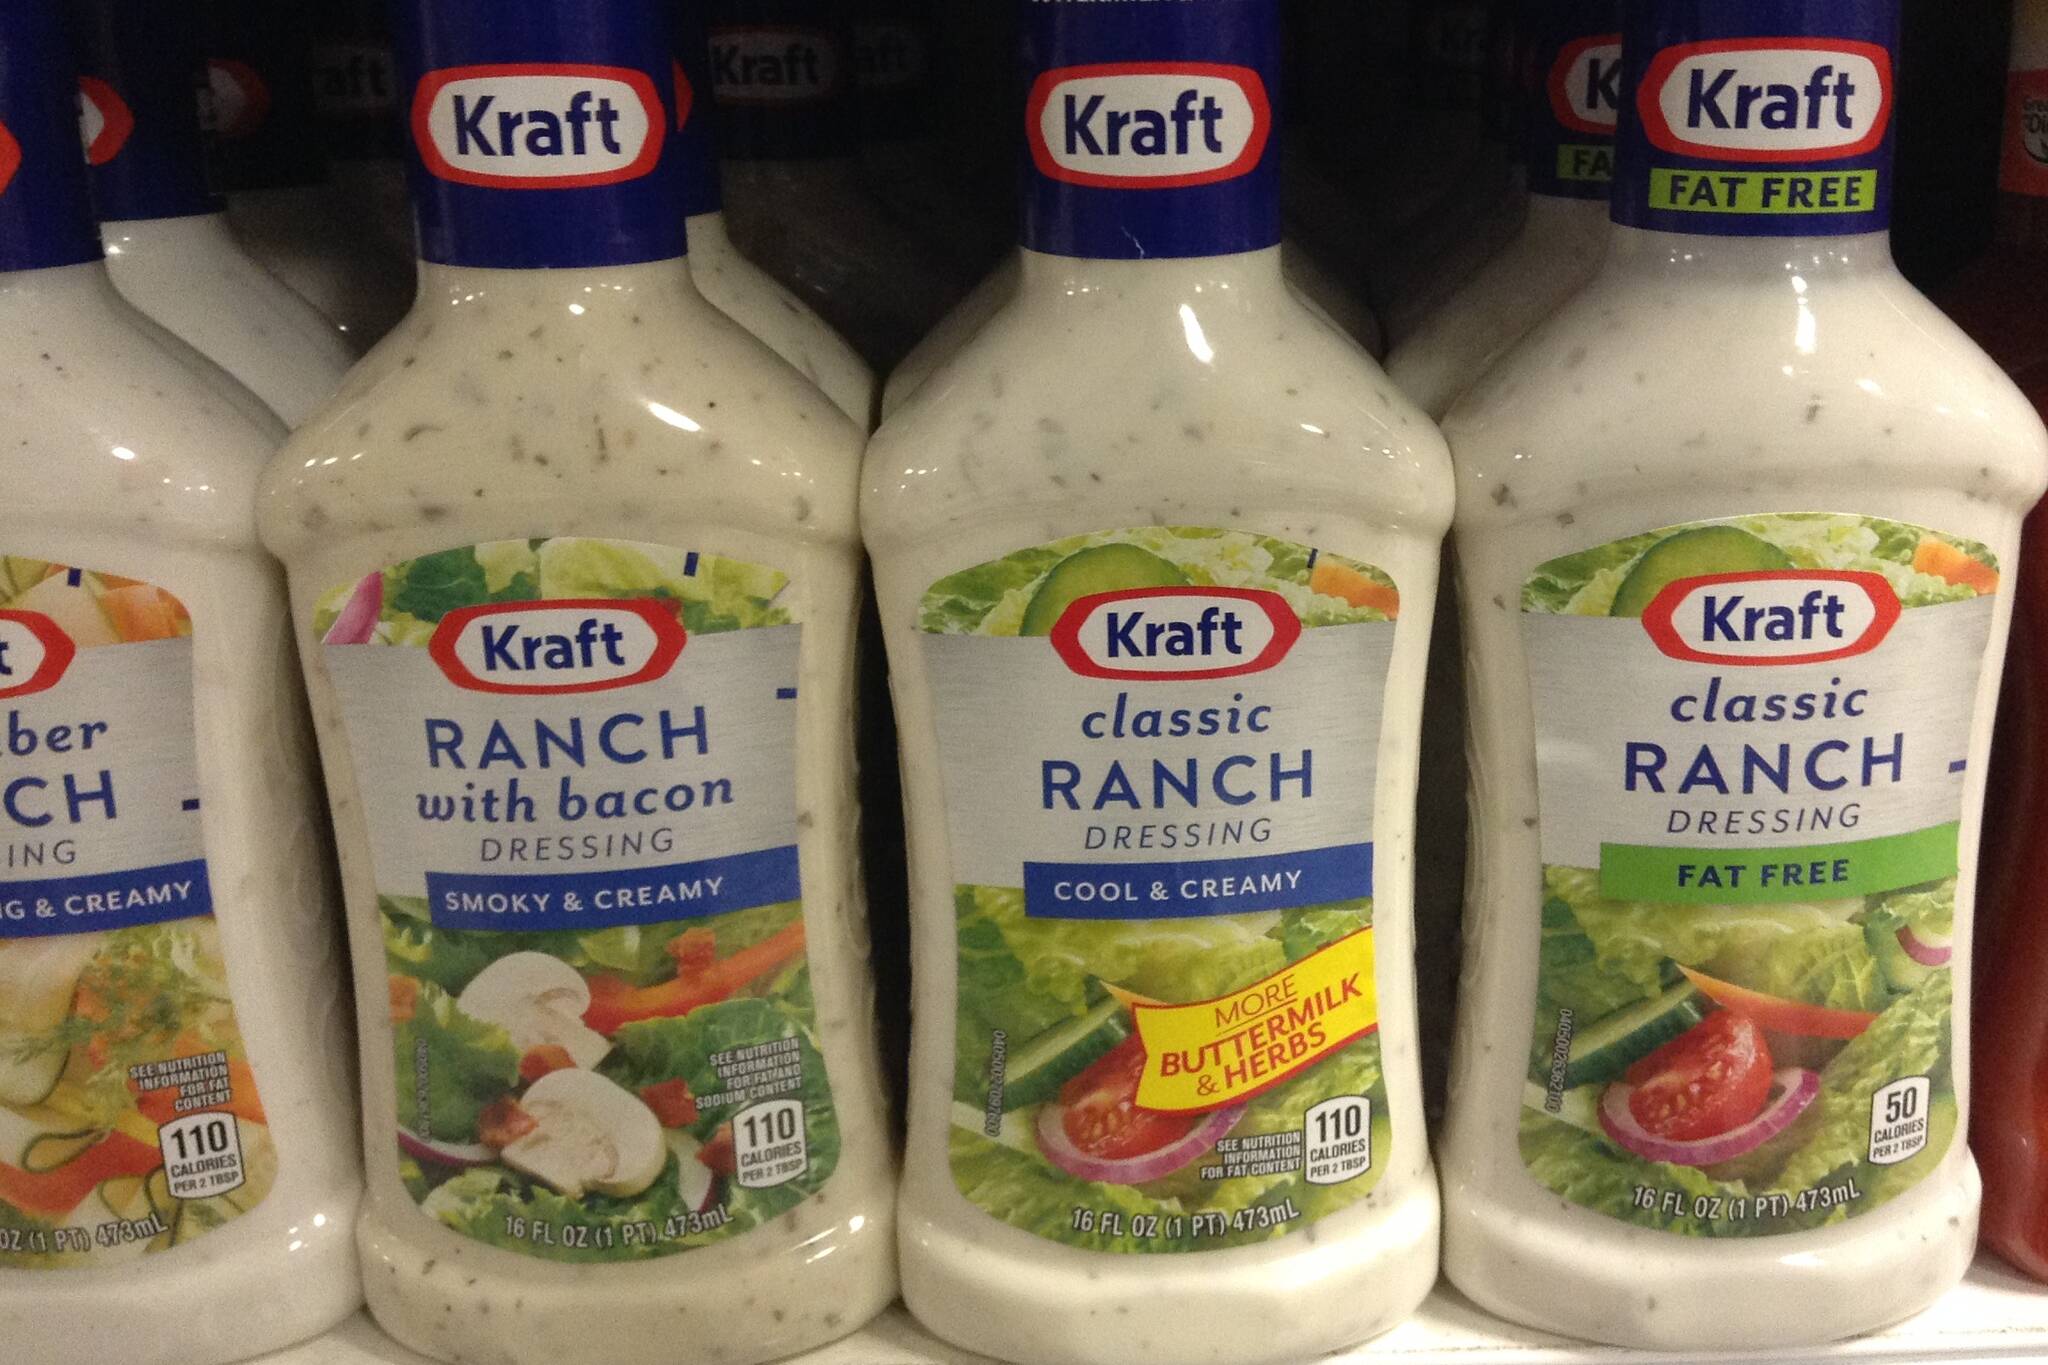 This photo available under a Creative Commons license shows several bottles of ranch dressing, which Geoff Kirsch notes "traditional ranch is quintessentially American, like baseball, jazz and the 64-ounce Double Big Gulp." (Mike Mozart / Flickr)